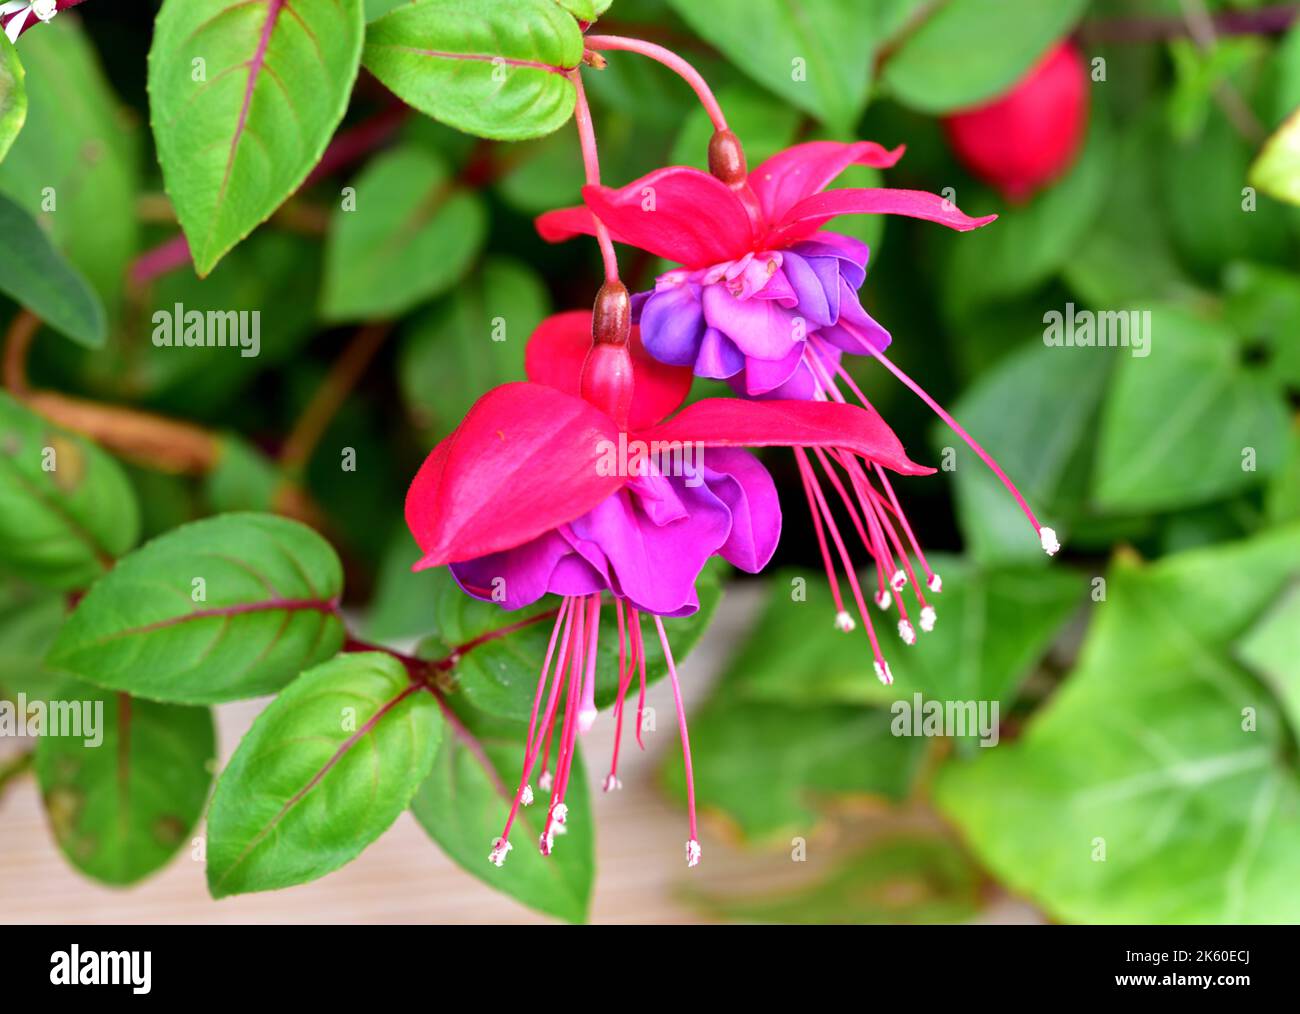 A pair of Fuchsia Magellanica, a little special but fascinating flowers Stock Photo